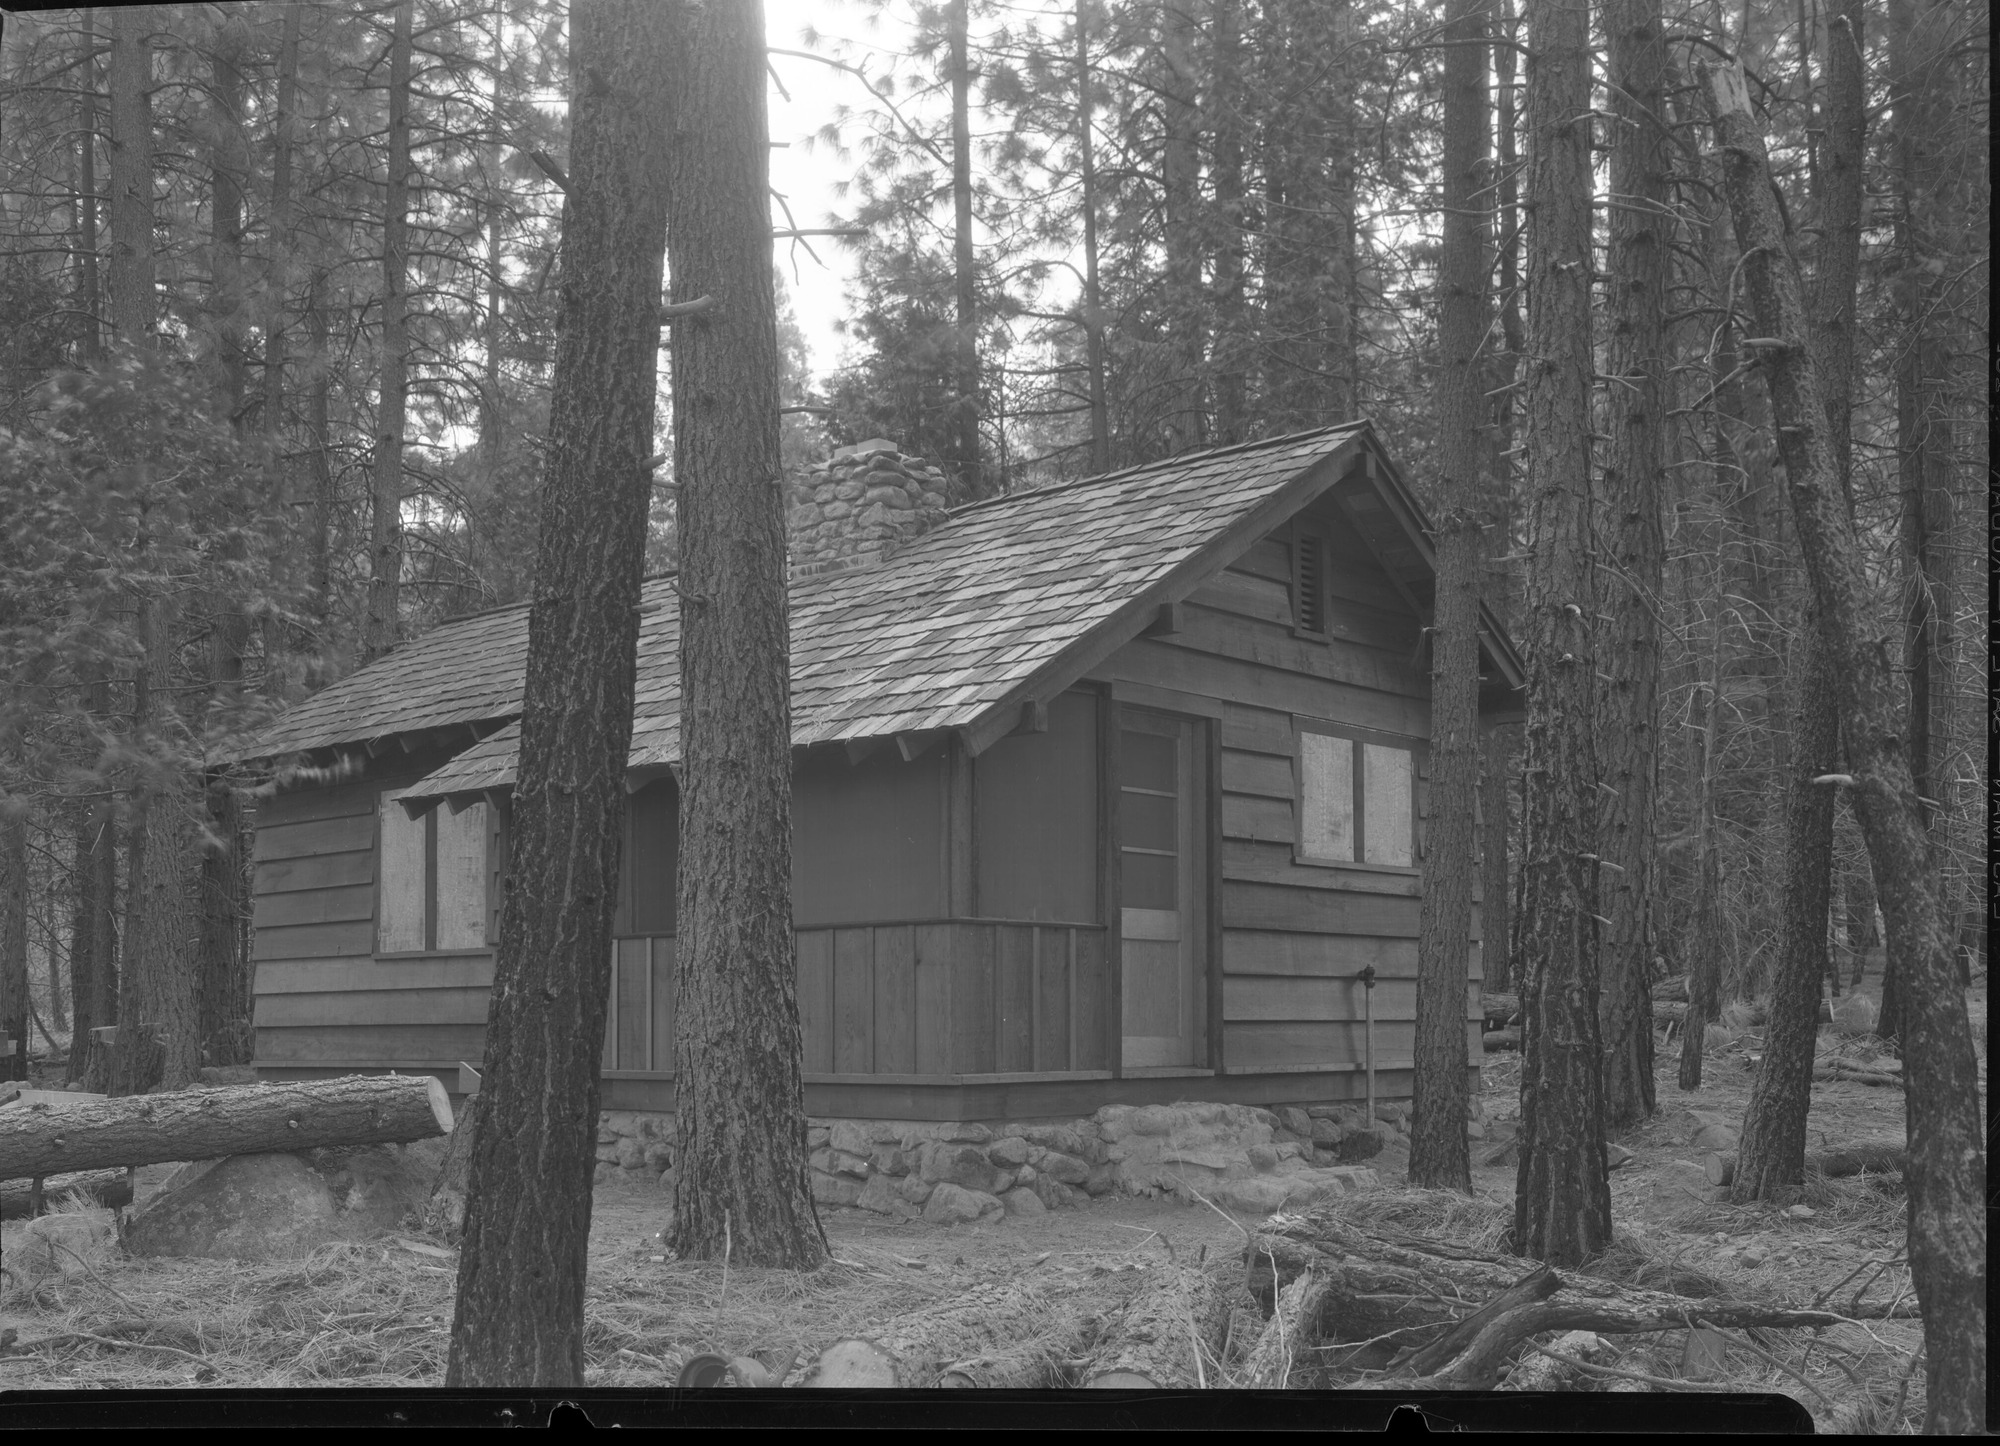 Cabin at Frog Creek completed by C. C. C.